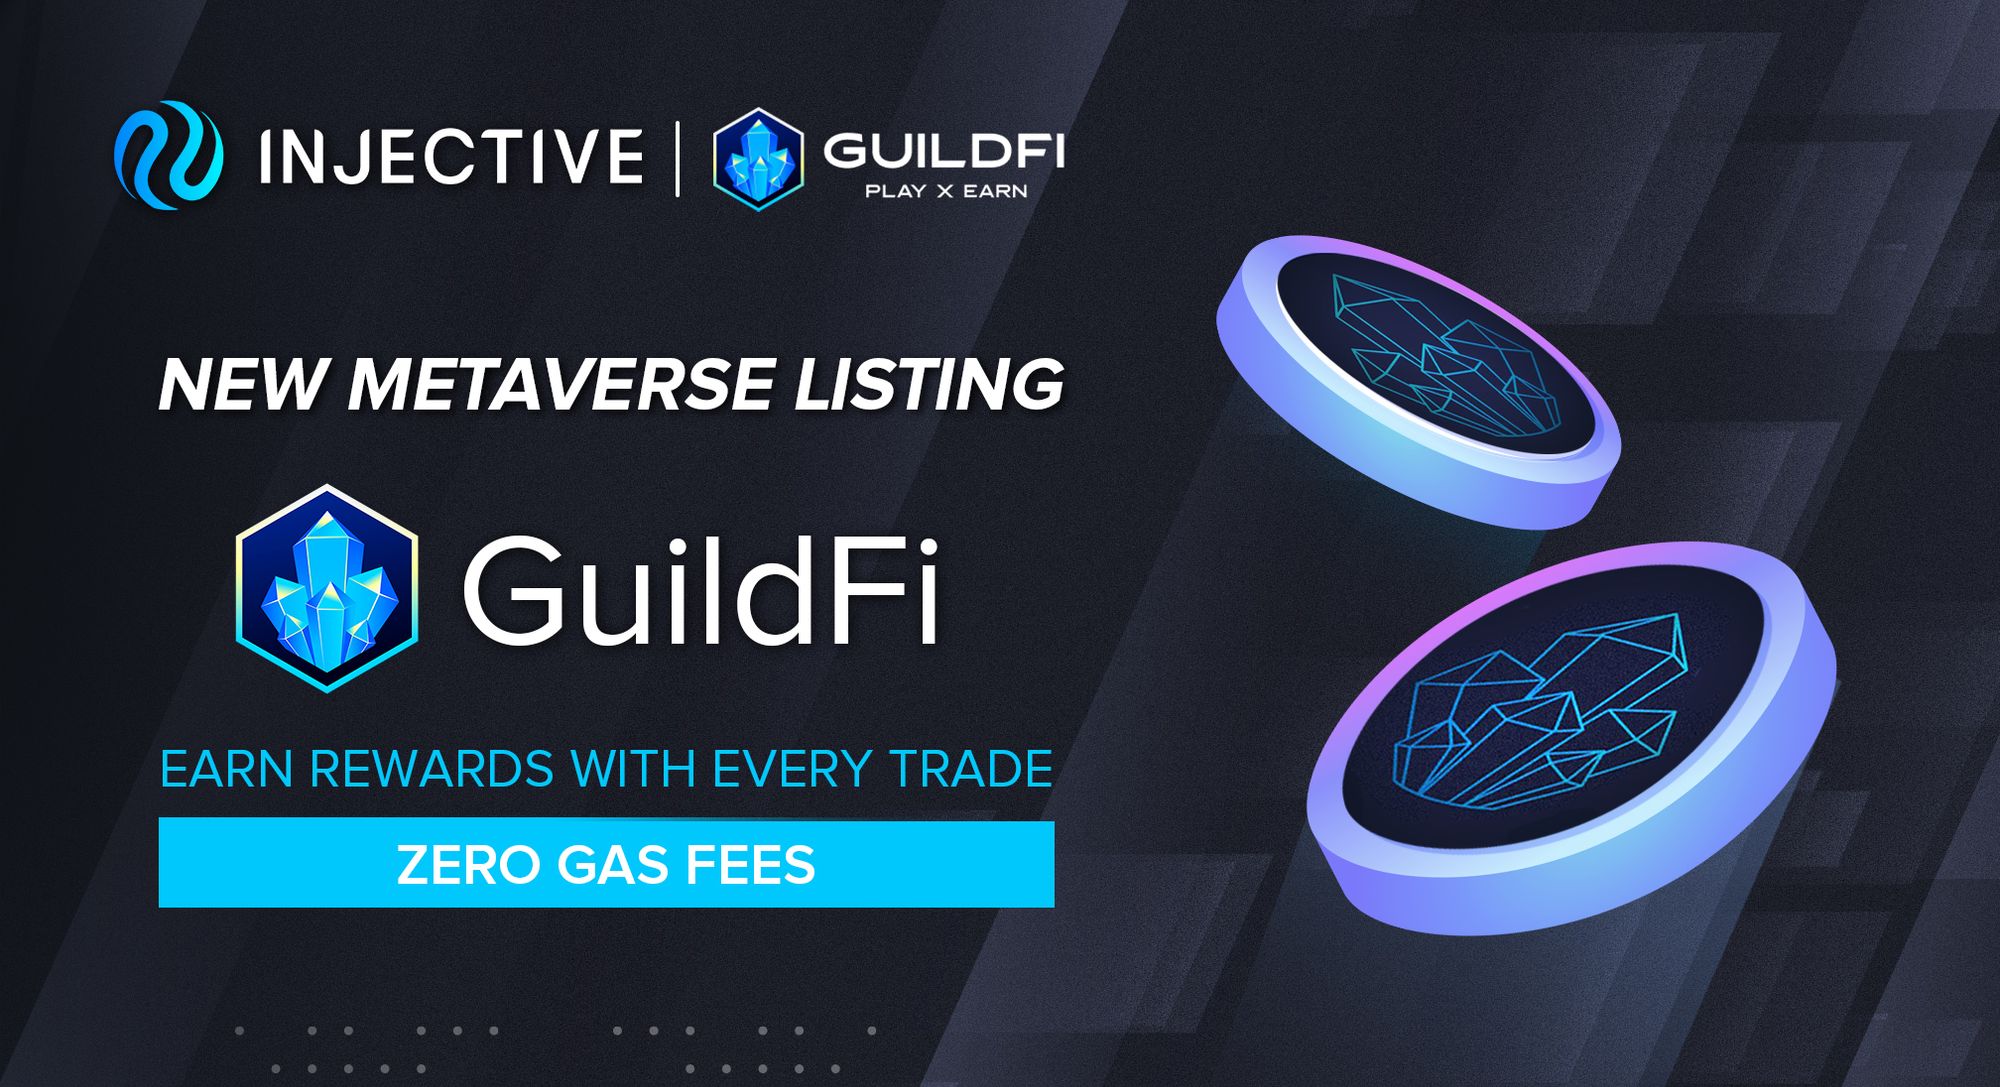 The First Injective Premier Metaverse Listing: GuildFi